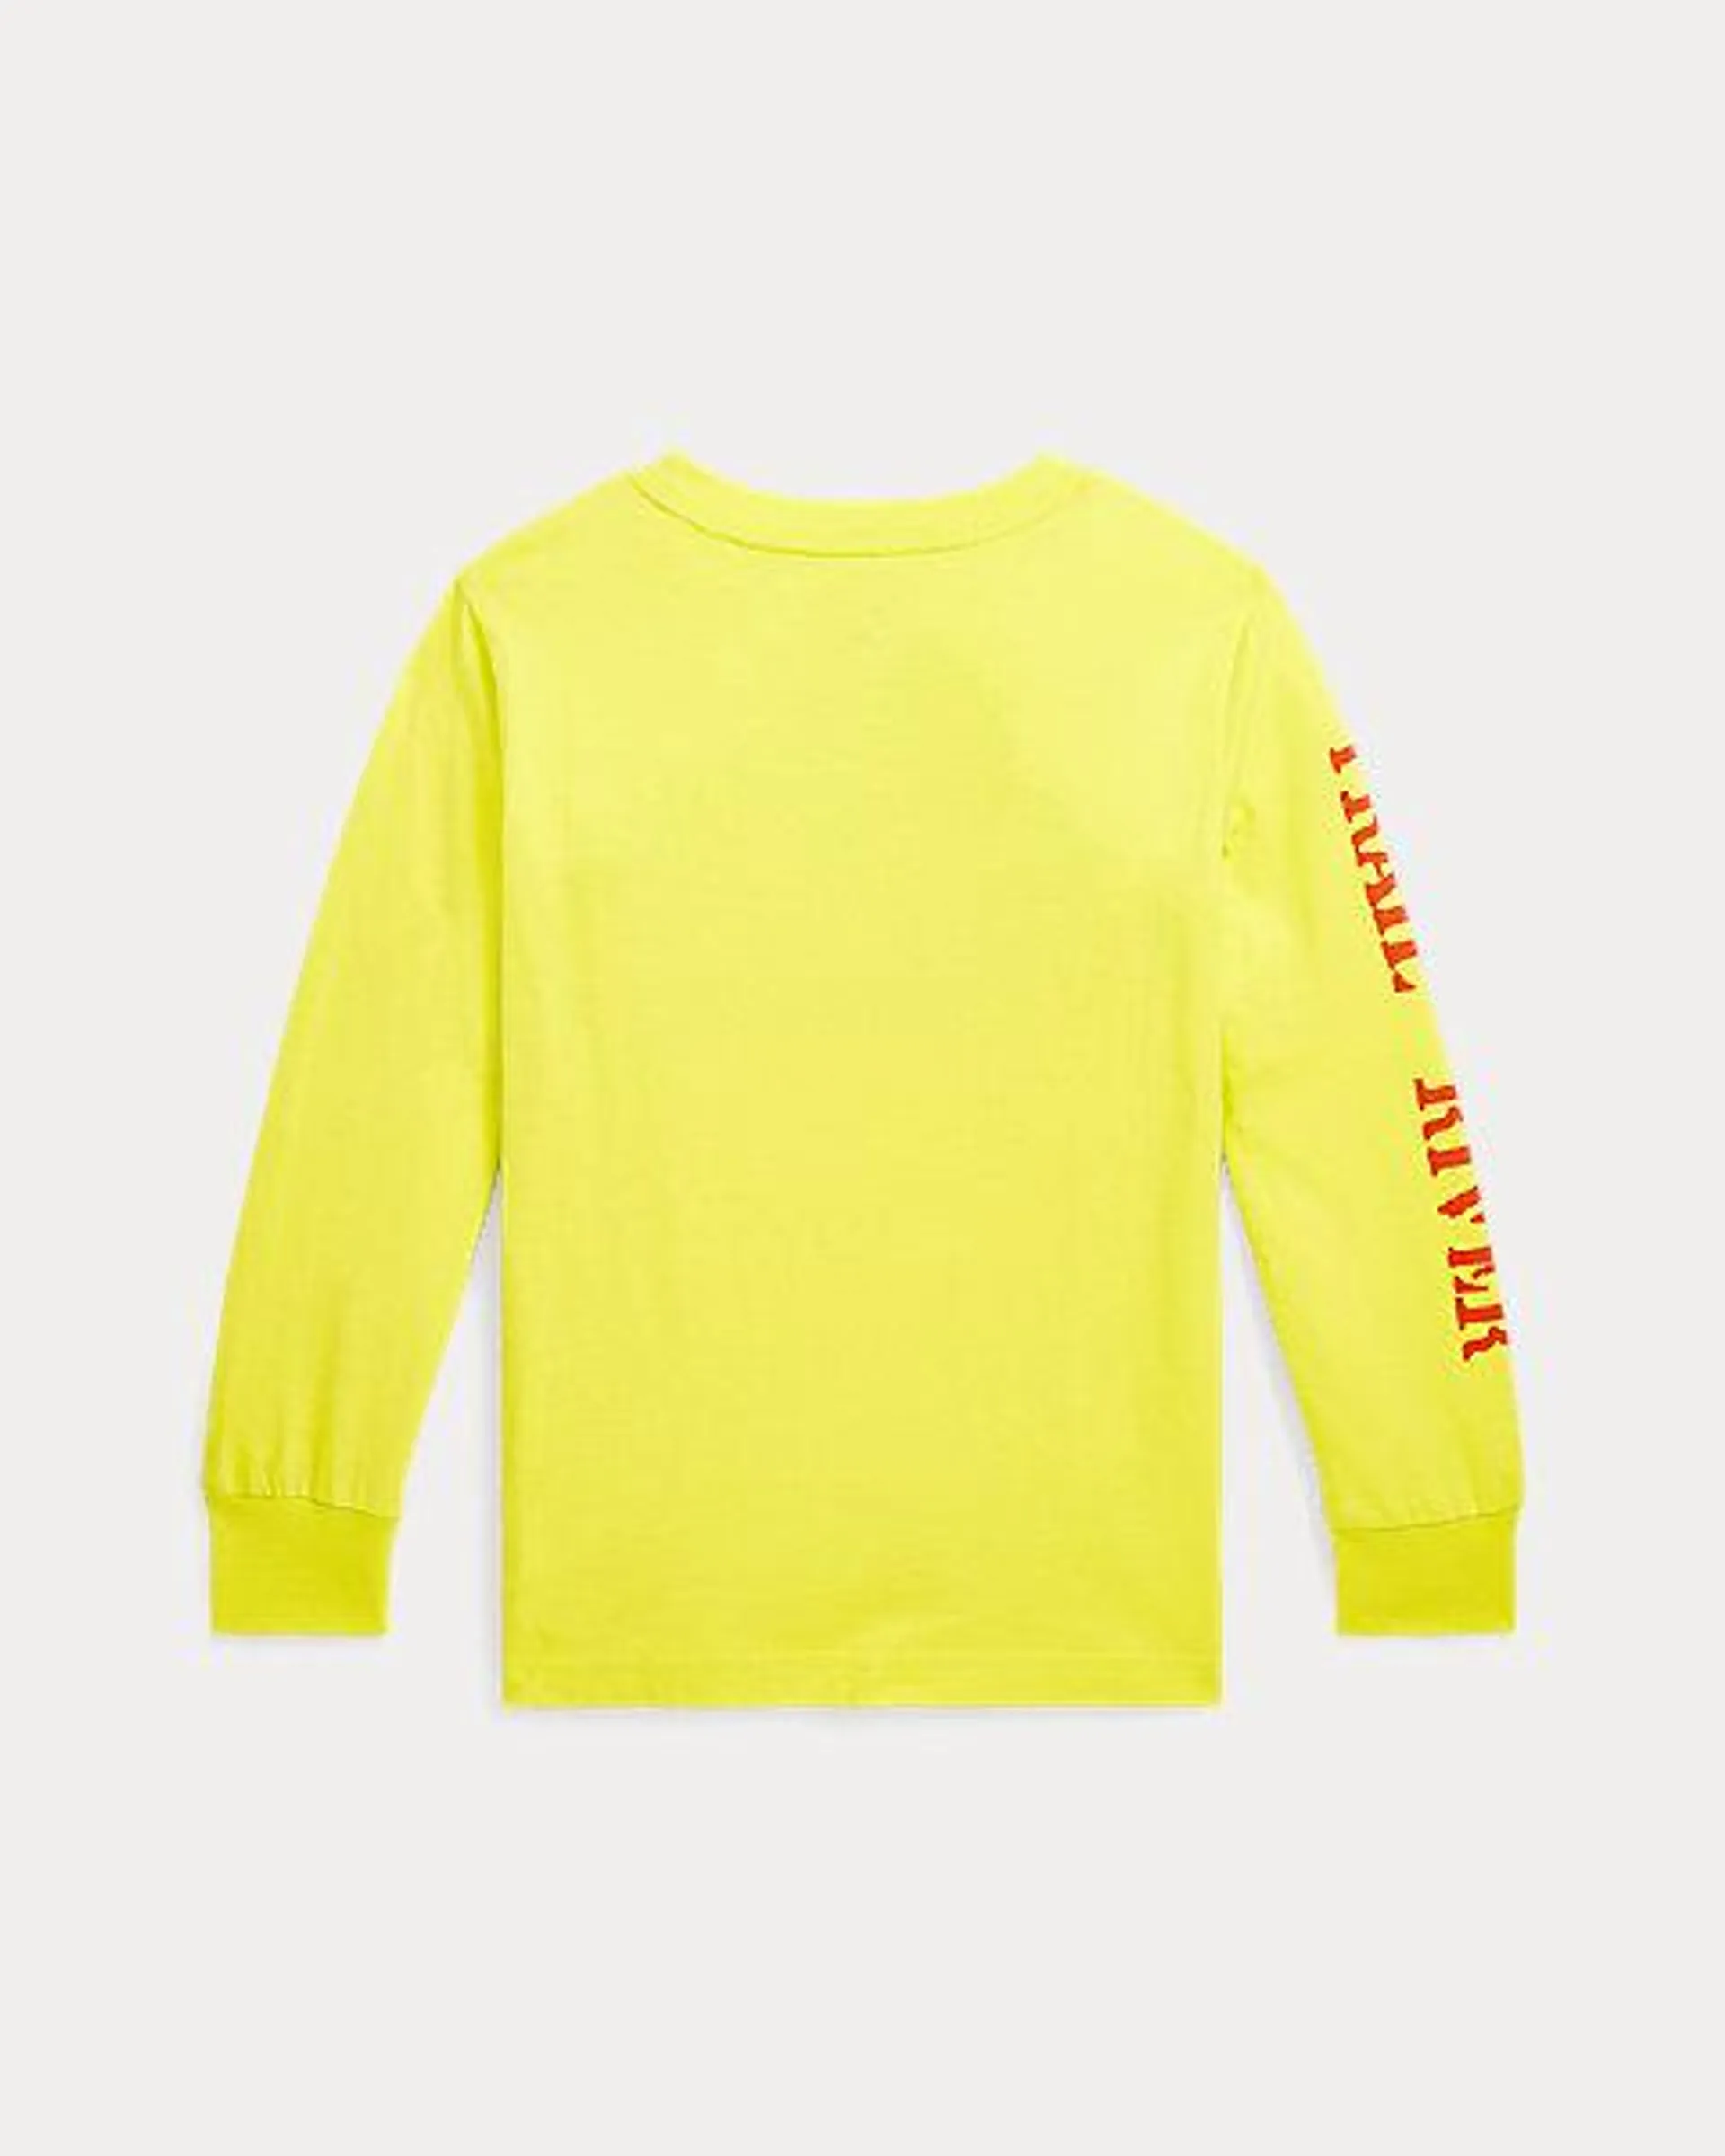 Cotton Long-Sleeve Graphic Tee